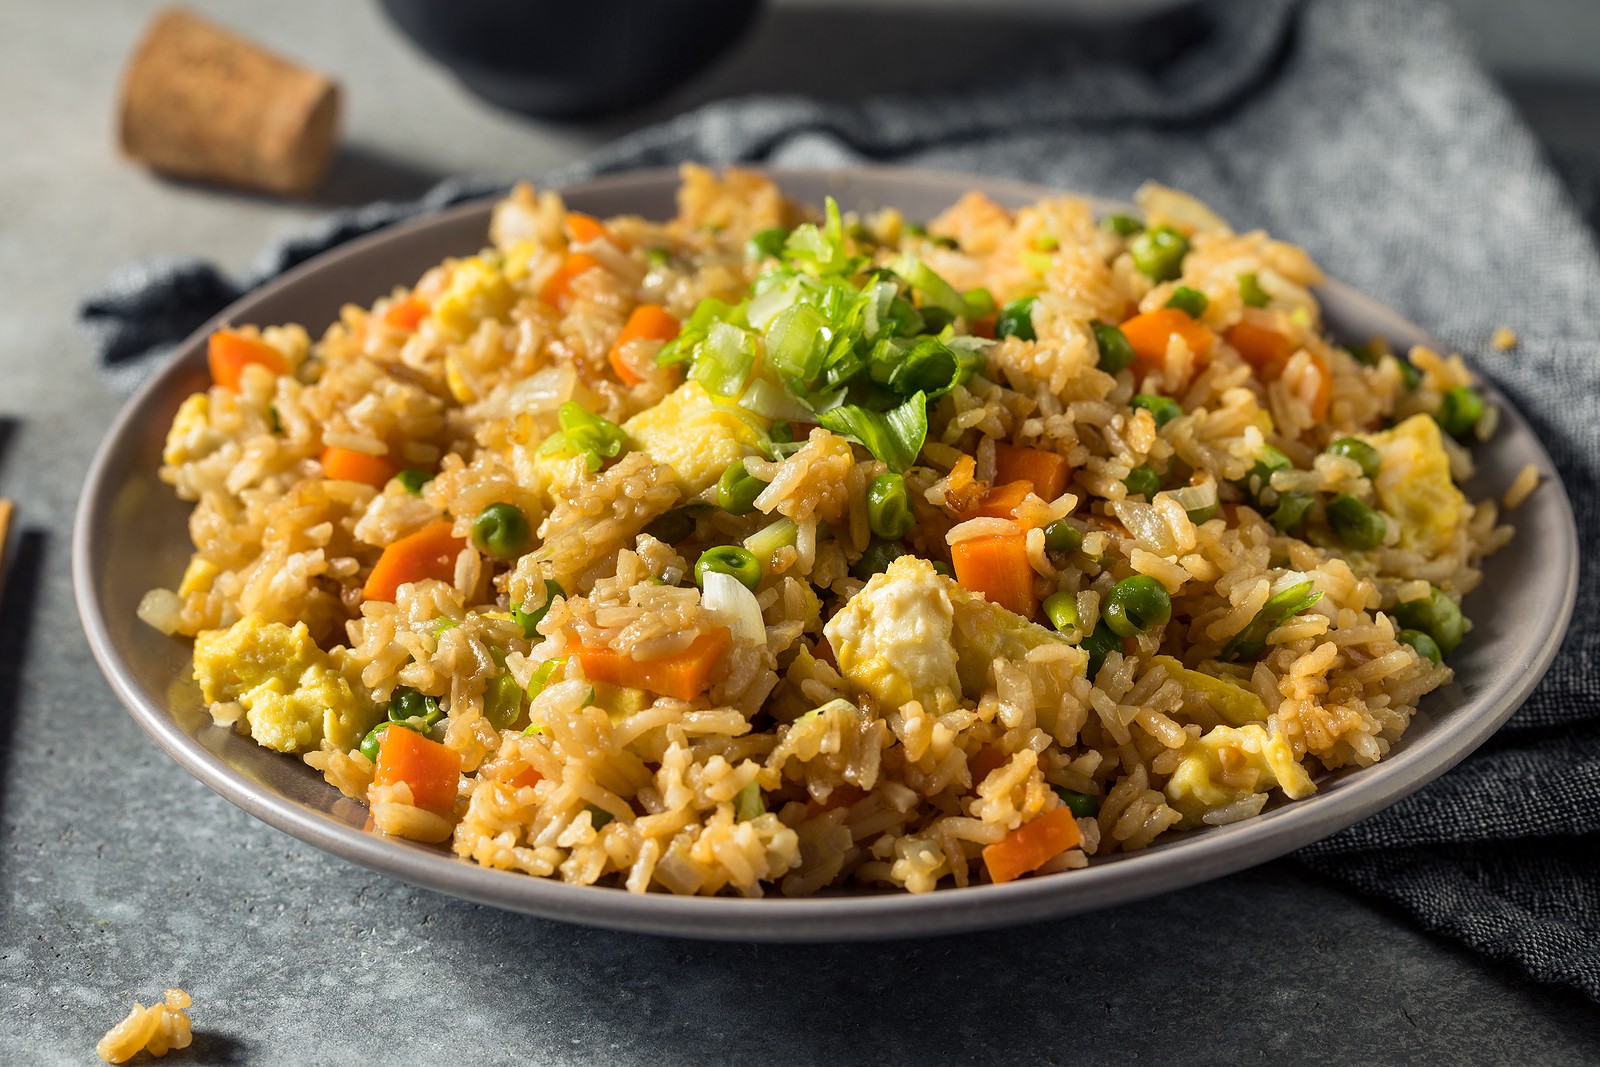 hot-sauce-on-fried-rice